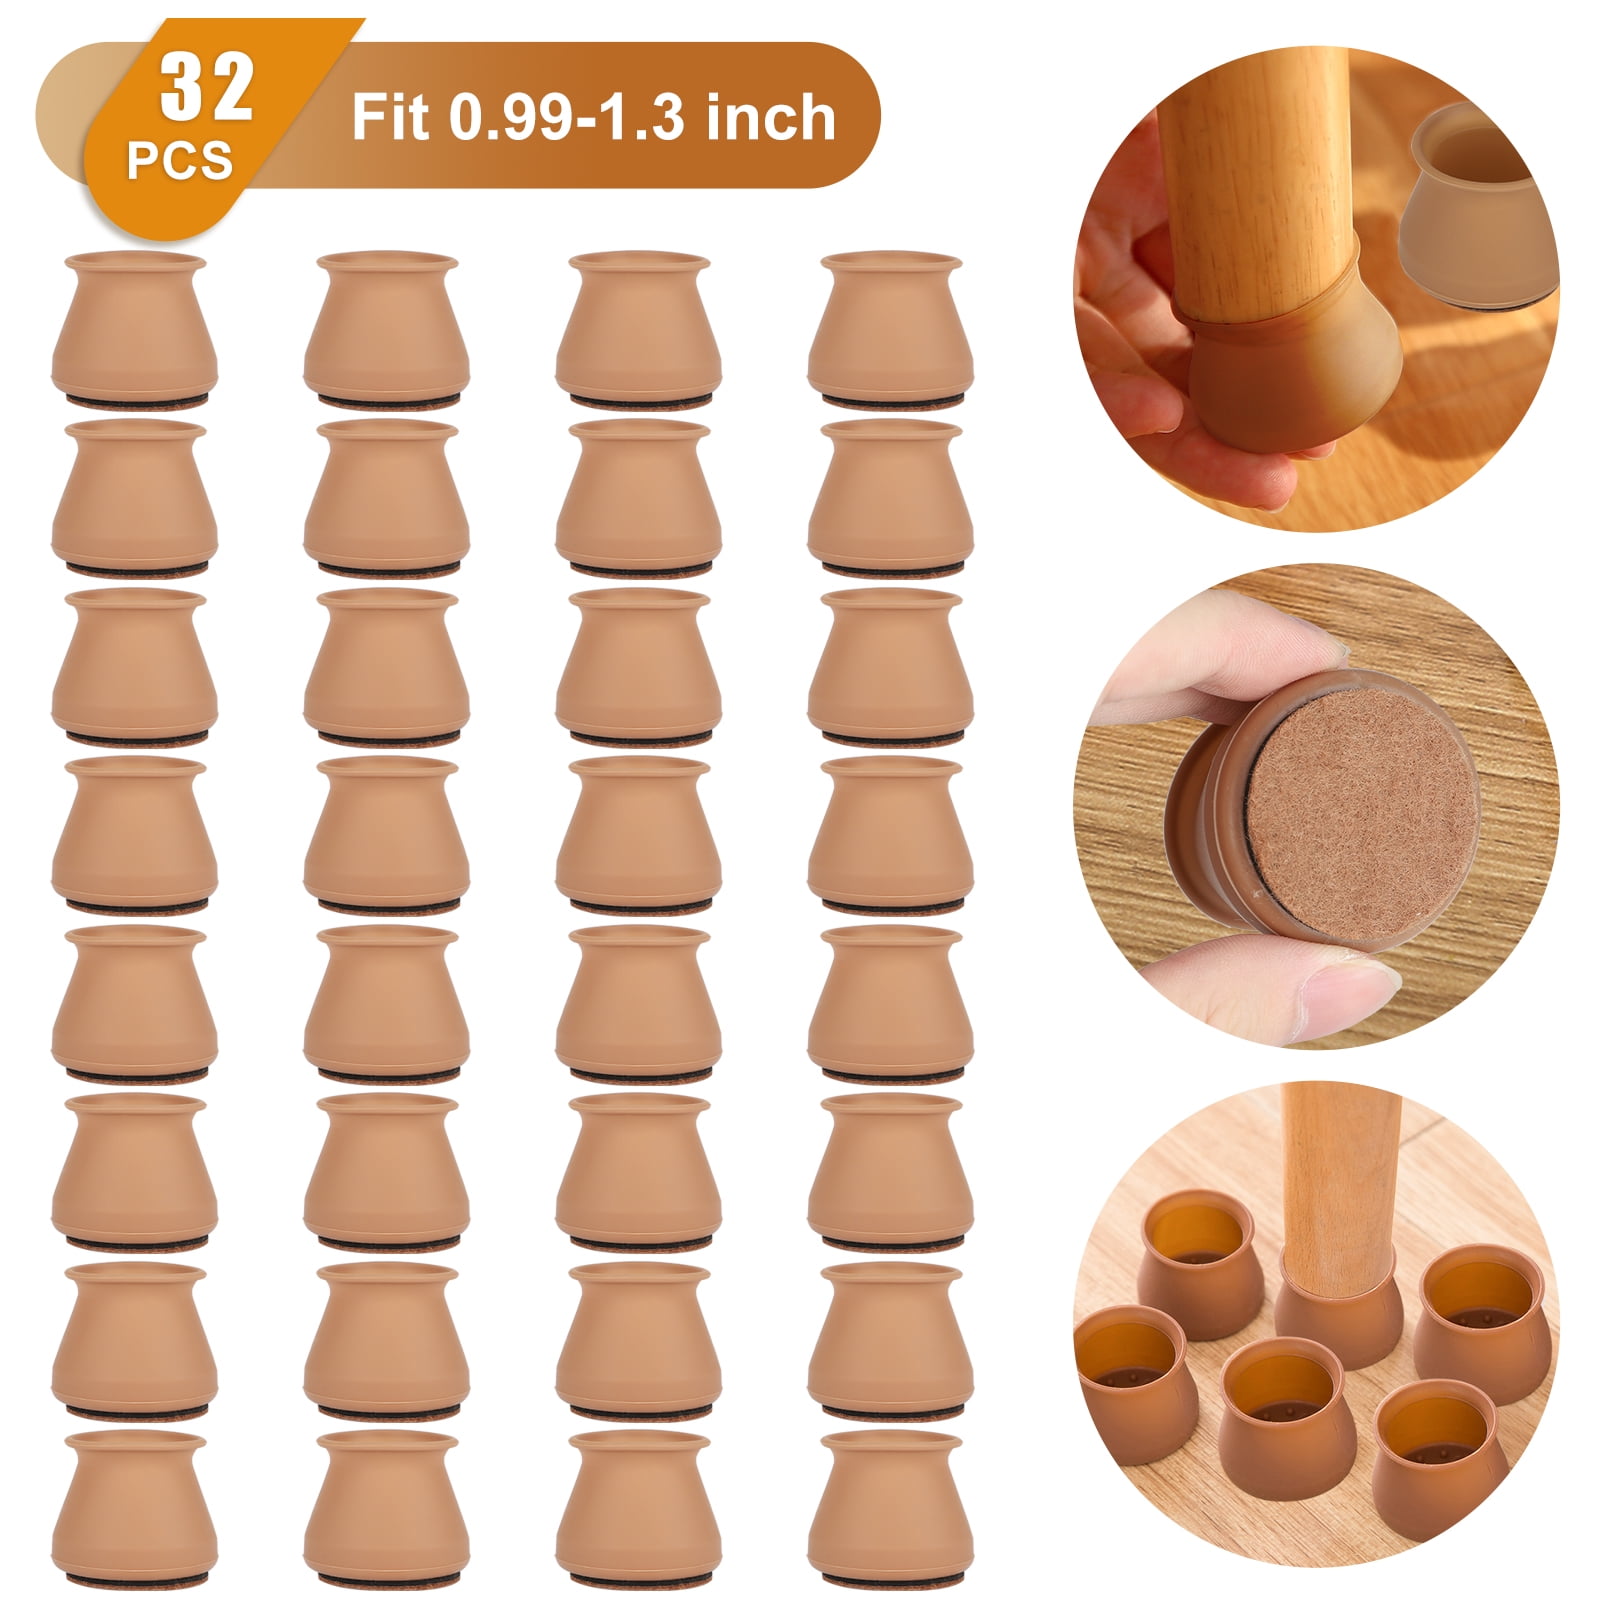 Chair Leg Caps Silicone Floor Protector Round Furniture Table Feet Cover Anti-Slip Bottom Chair Pads 32PCS Furniture Silicon Protection Cover Prevents Scratches and Noise Without Leaving Marks